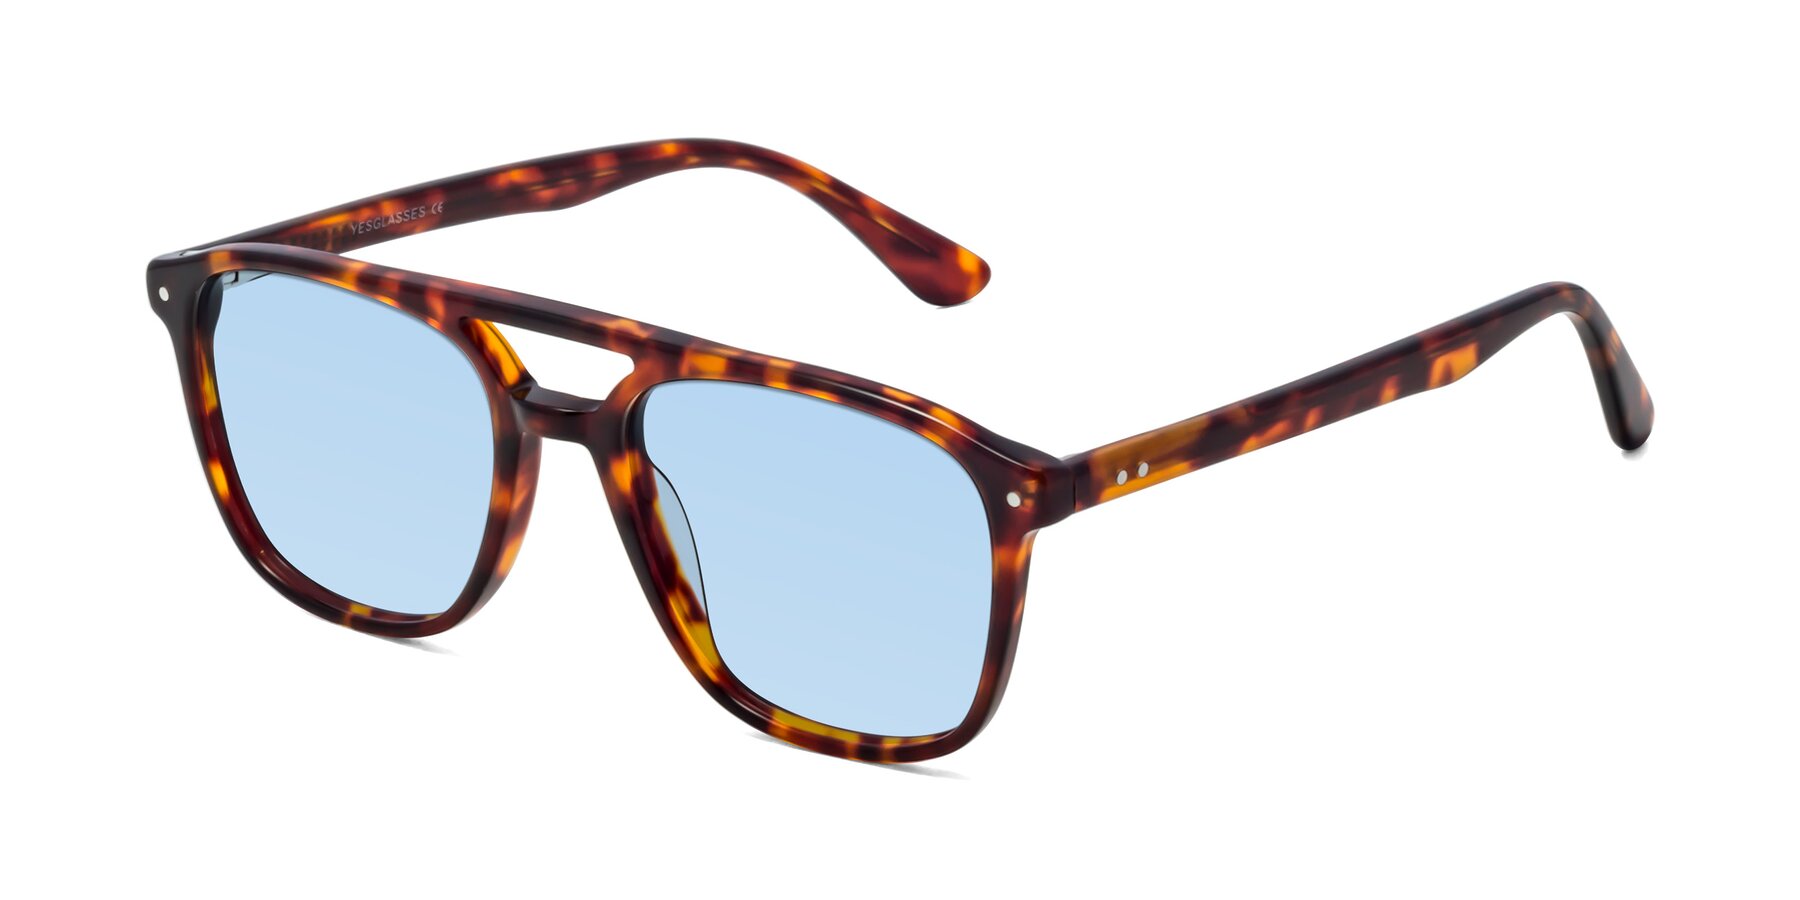 Angle of Quantum in Tortoise with Light Blue Tinted Lenses